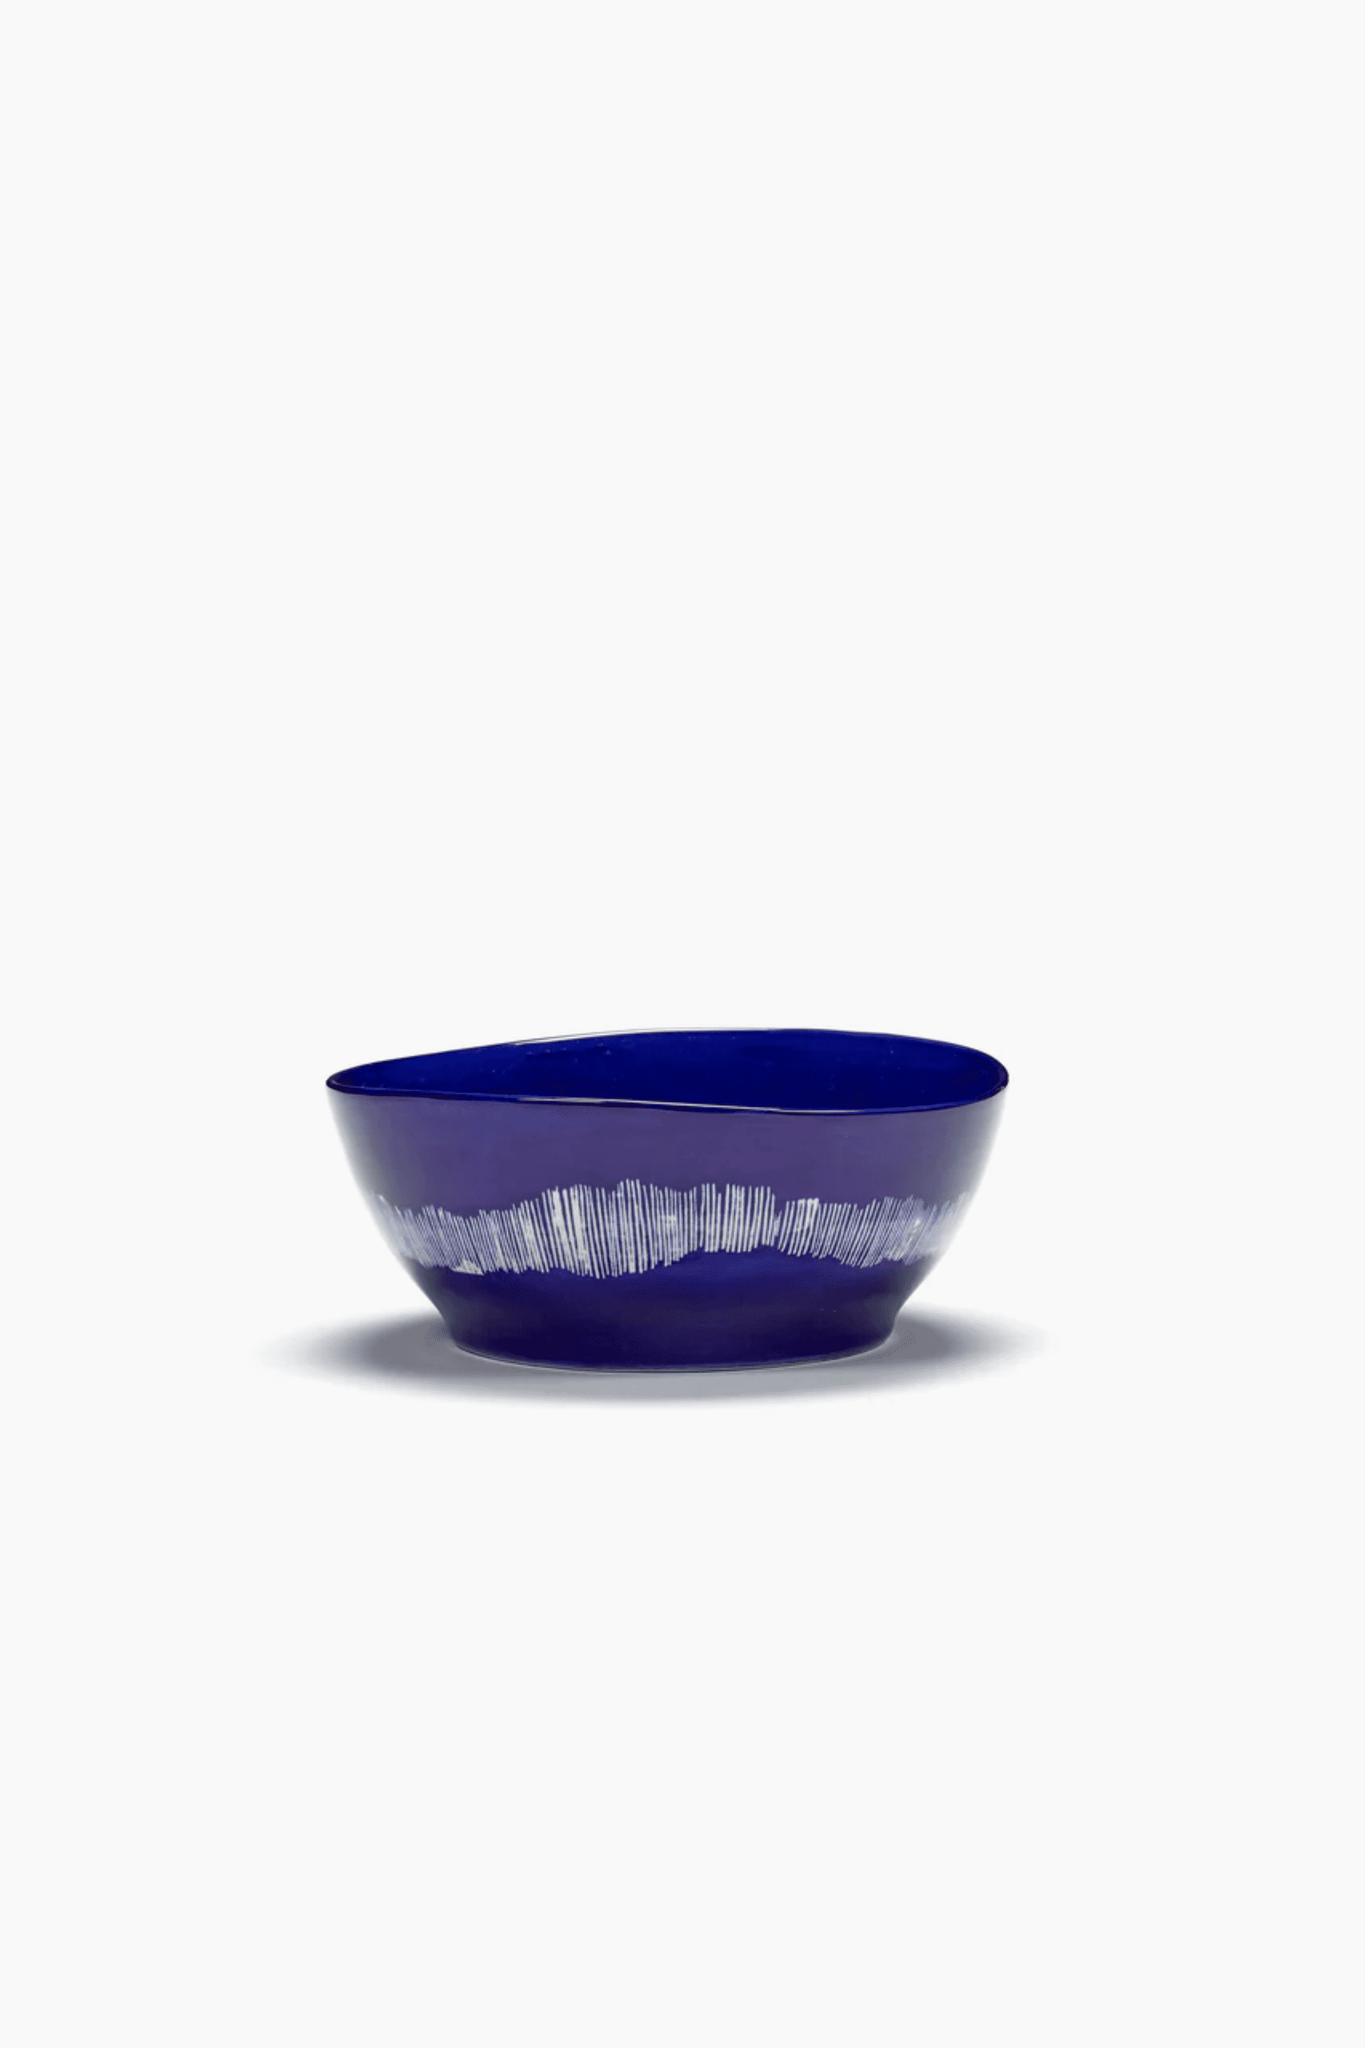 Set of 4 Large Bowls, Lapis Lazuli Swirl with White Stripes Ottolenghi Serax, side view